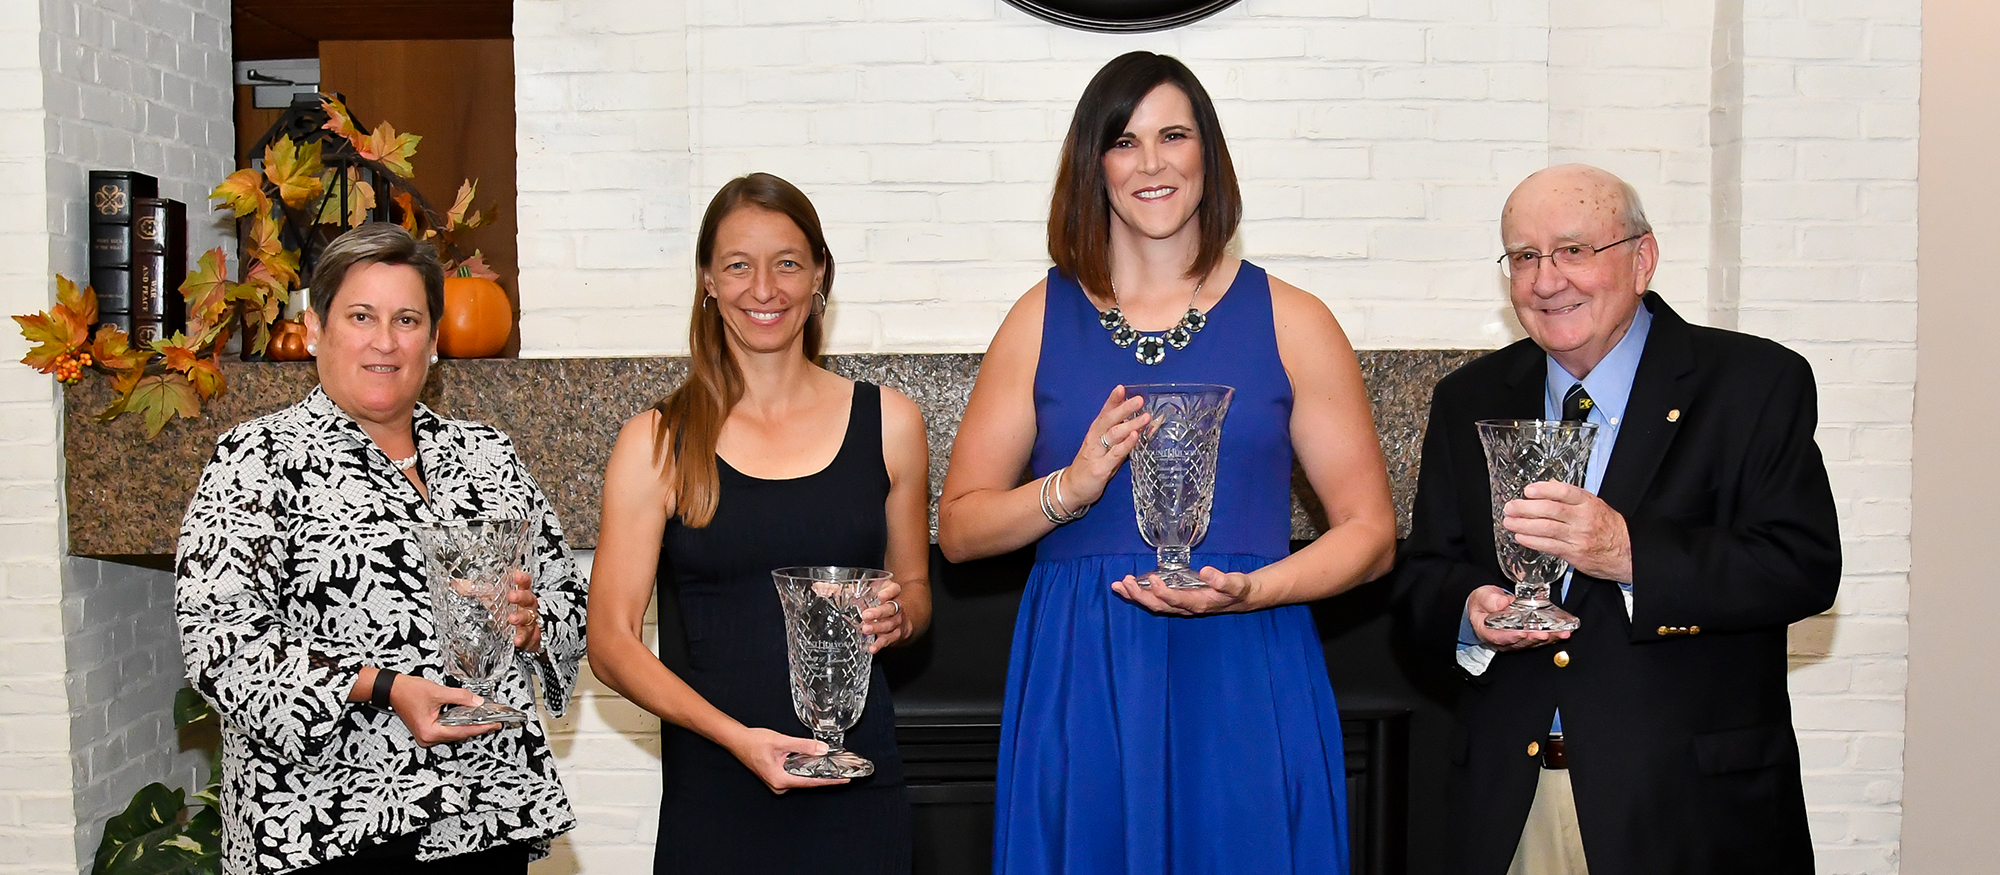 Photo of the Mount Holyoke Athletics Hall of Fame Class of 2017. Left to right pictured are Jean Osachuk '80, Michelle Johannes '93, Jessica Justice '03 and Bob Bontempo.